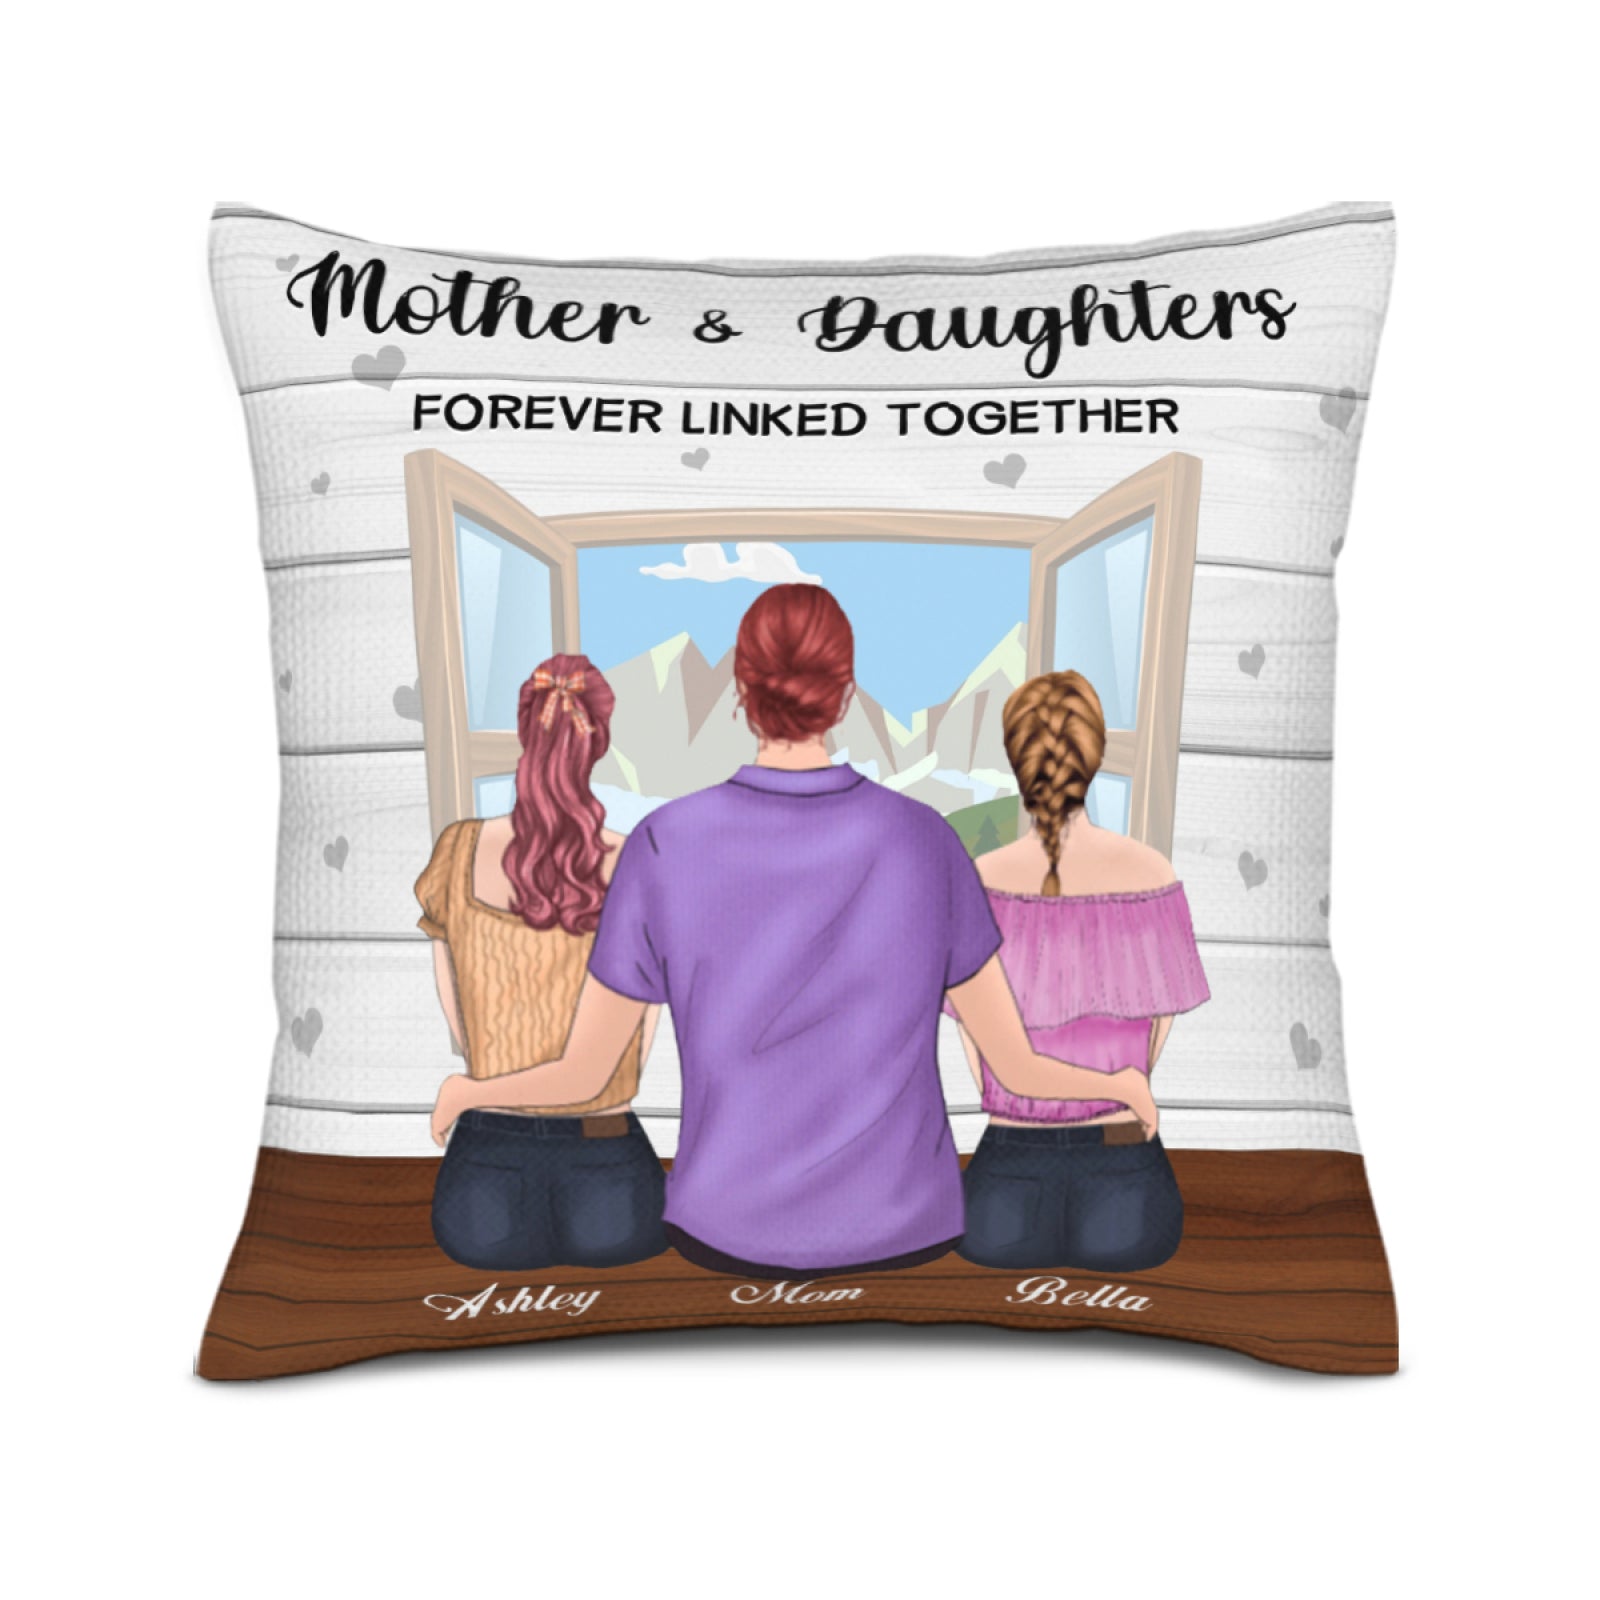 Personalized Pillow Case with Beautiful Pattern, Custom Gifts for Mom, Love Letter Pillow Case for Mom, Beautiful Home Decor Gifts - colorfulcustom